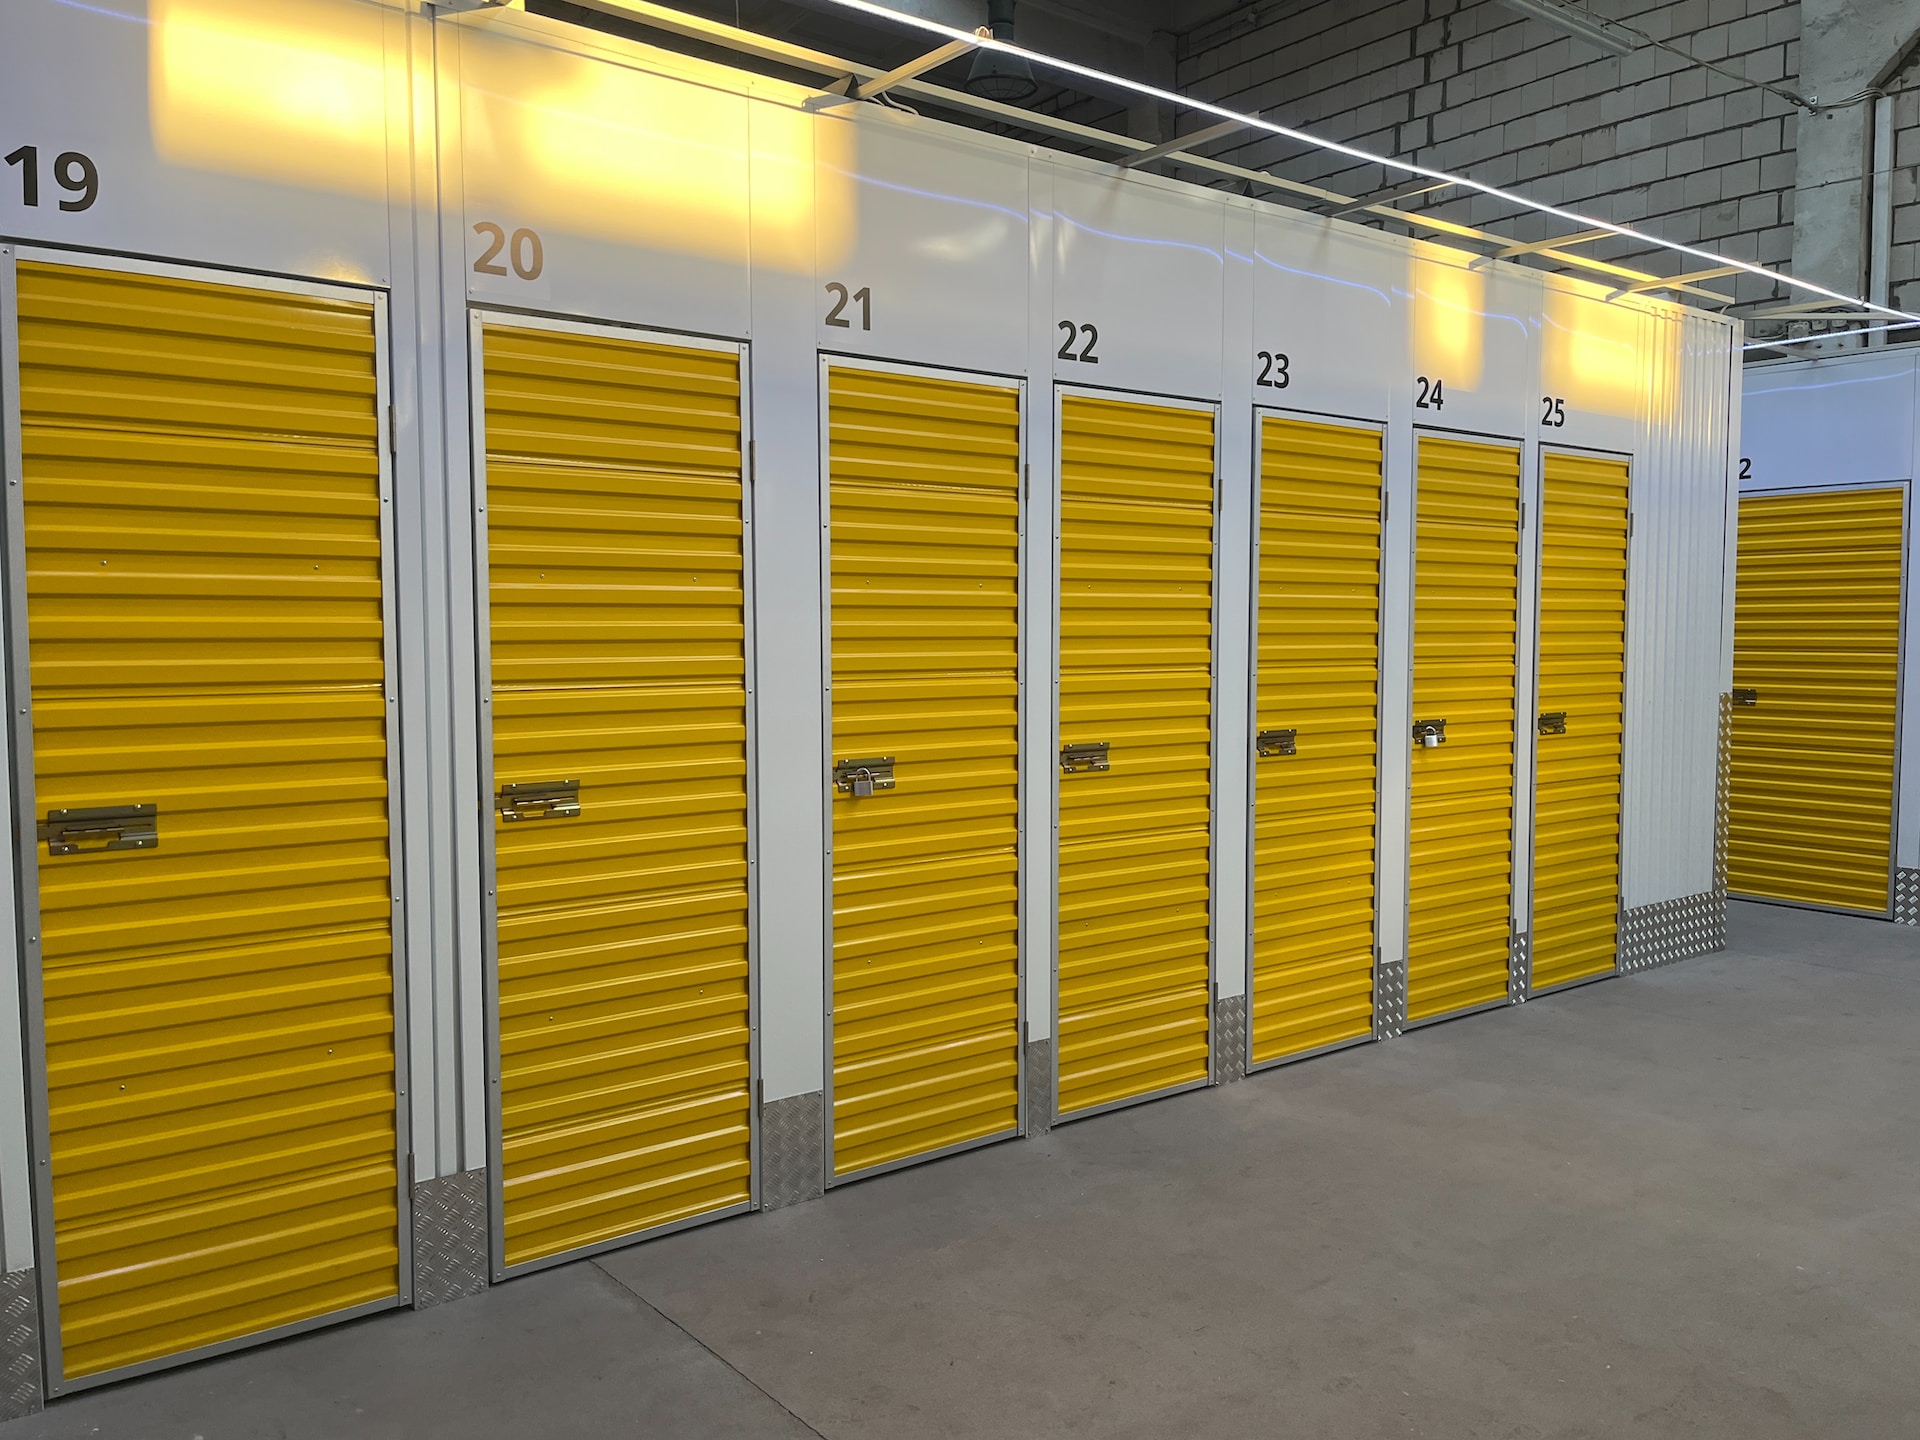 Protecting Your Belongings - Why You Need a Quality Storage Unit